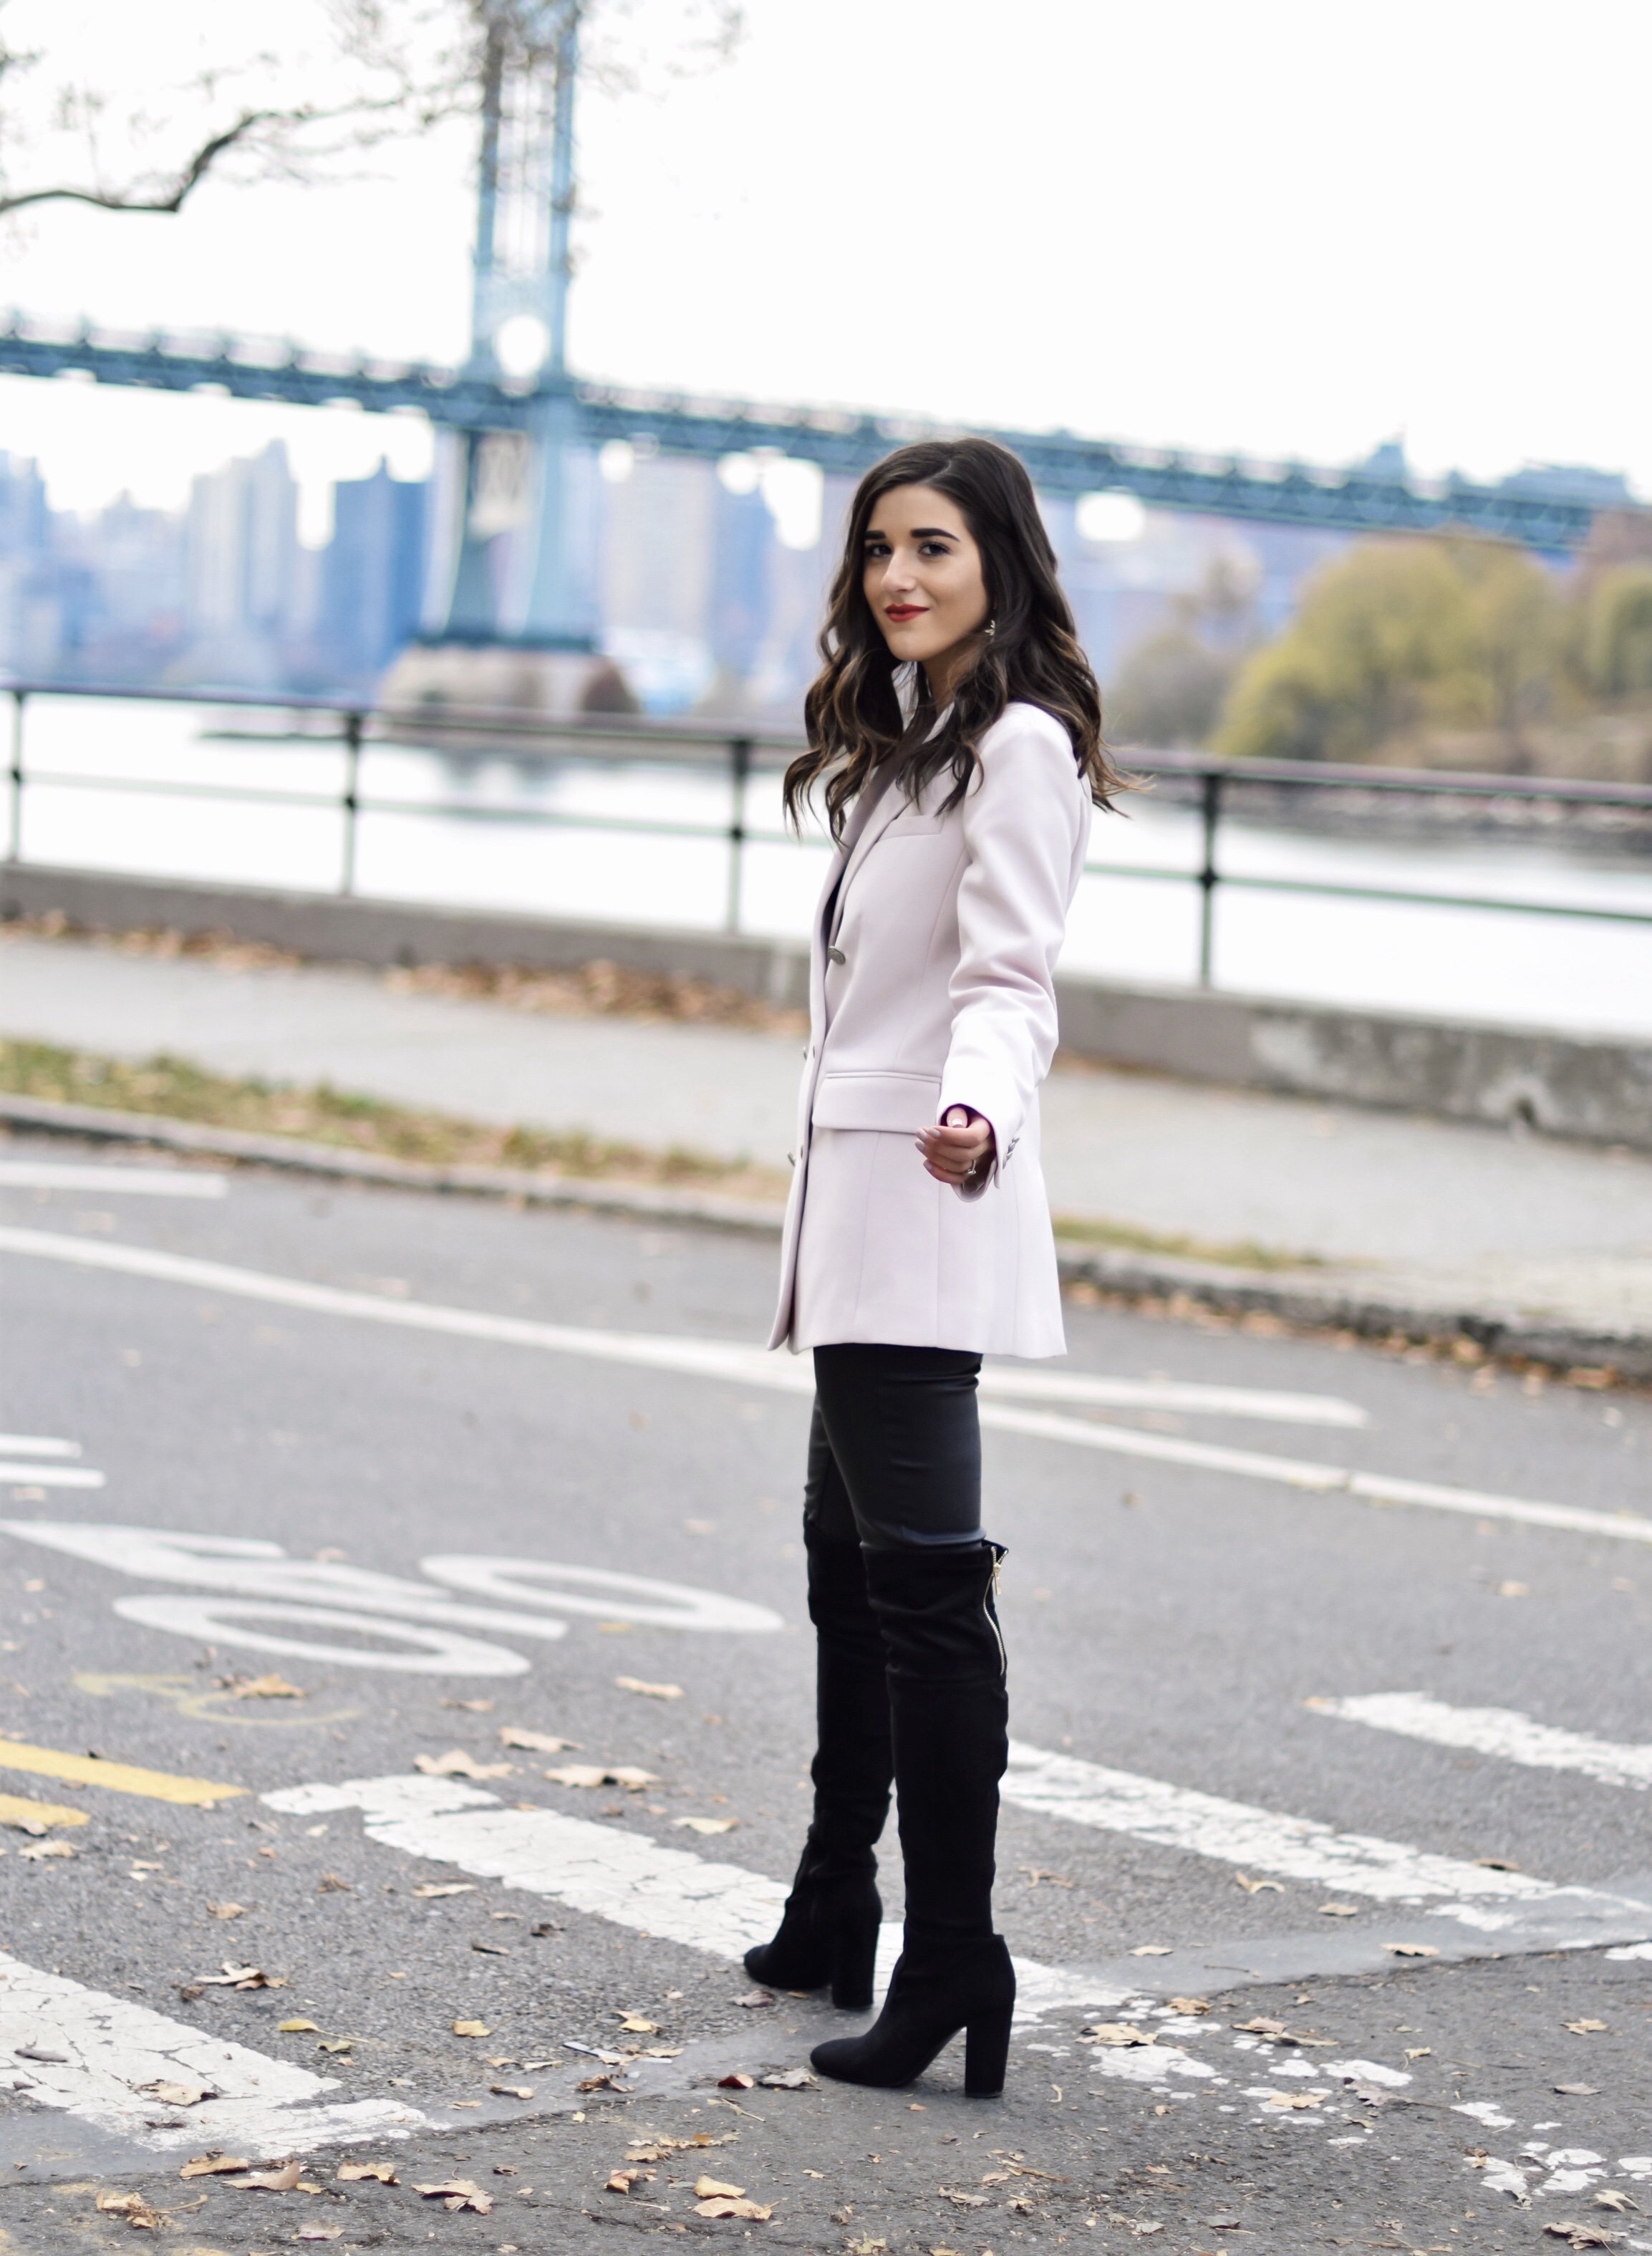 Why Some Bloggers Beg You To Like Their Photos Light Pink Blazer Leather Leggings Esther Santer Fashion Blog NYC Street Style Blogger Outfit OOTD Trendy Rachel Roy Black Over The Knee Boot Girl Women Astoria Photoshoot Winter Fall Shopping Sale Jacket.jpg